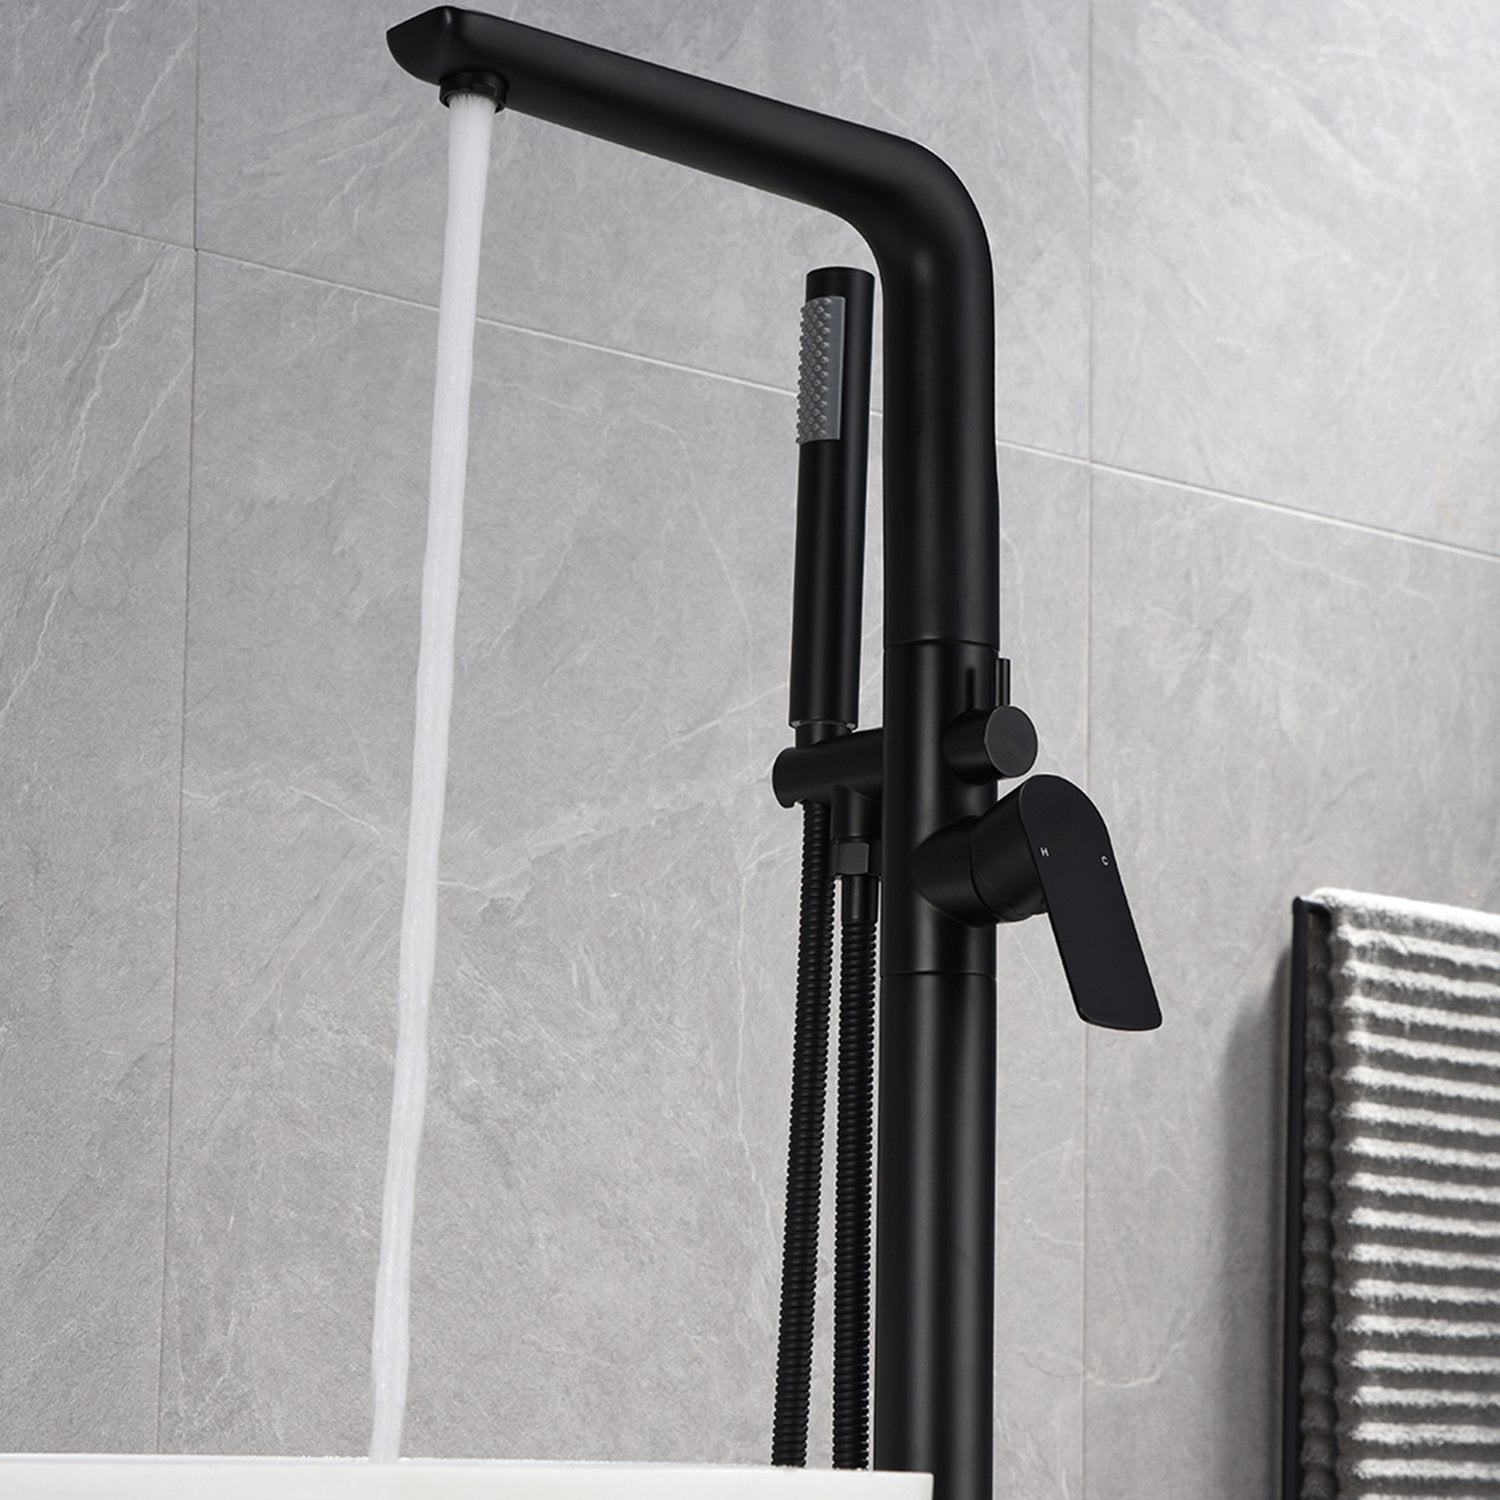 2-Handle Claw Foot Freestanding Tub Faucet with Shower in Matte Black - Alipuinc